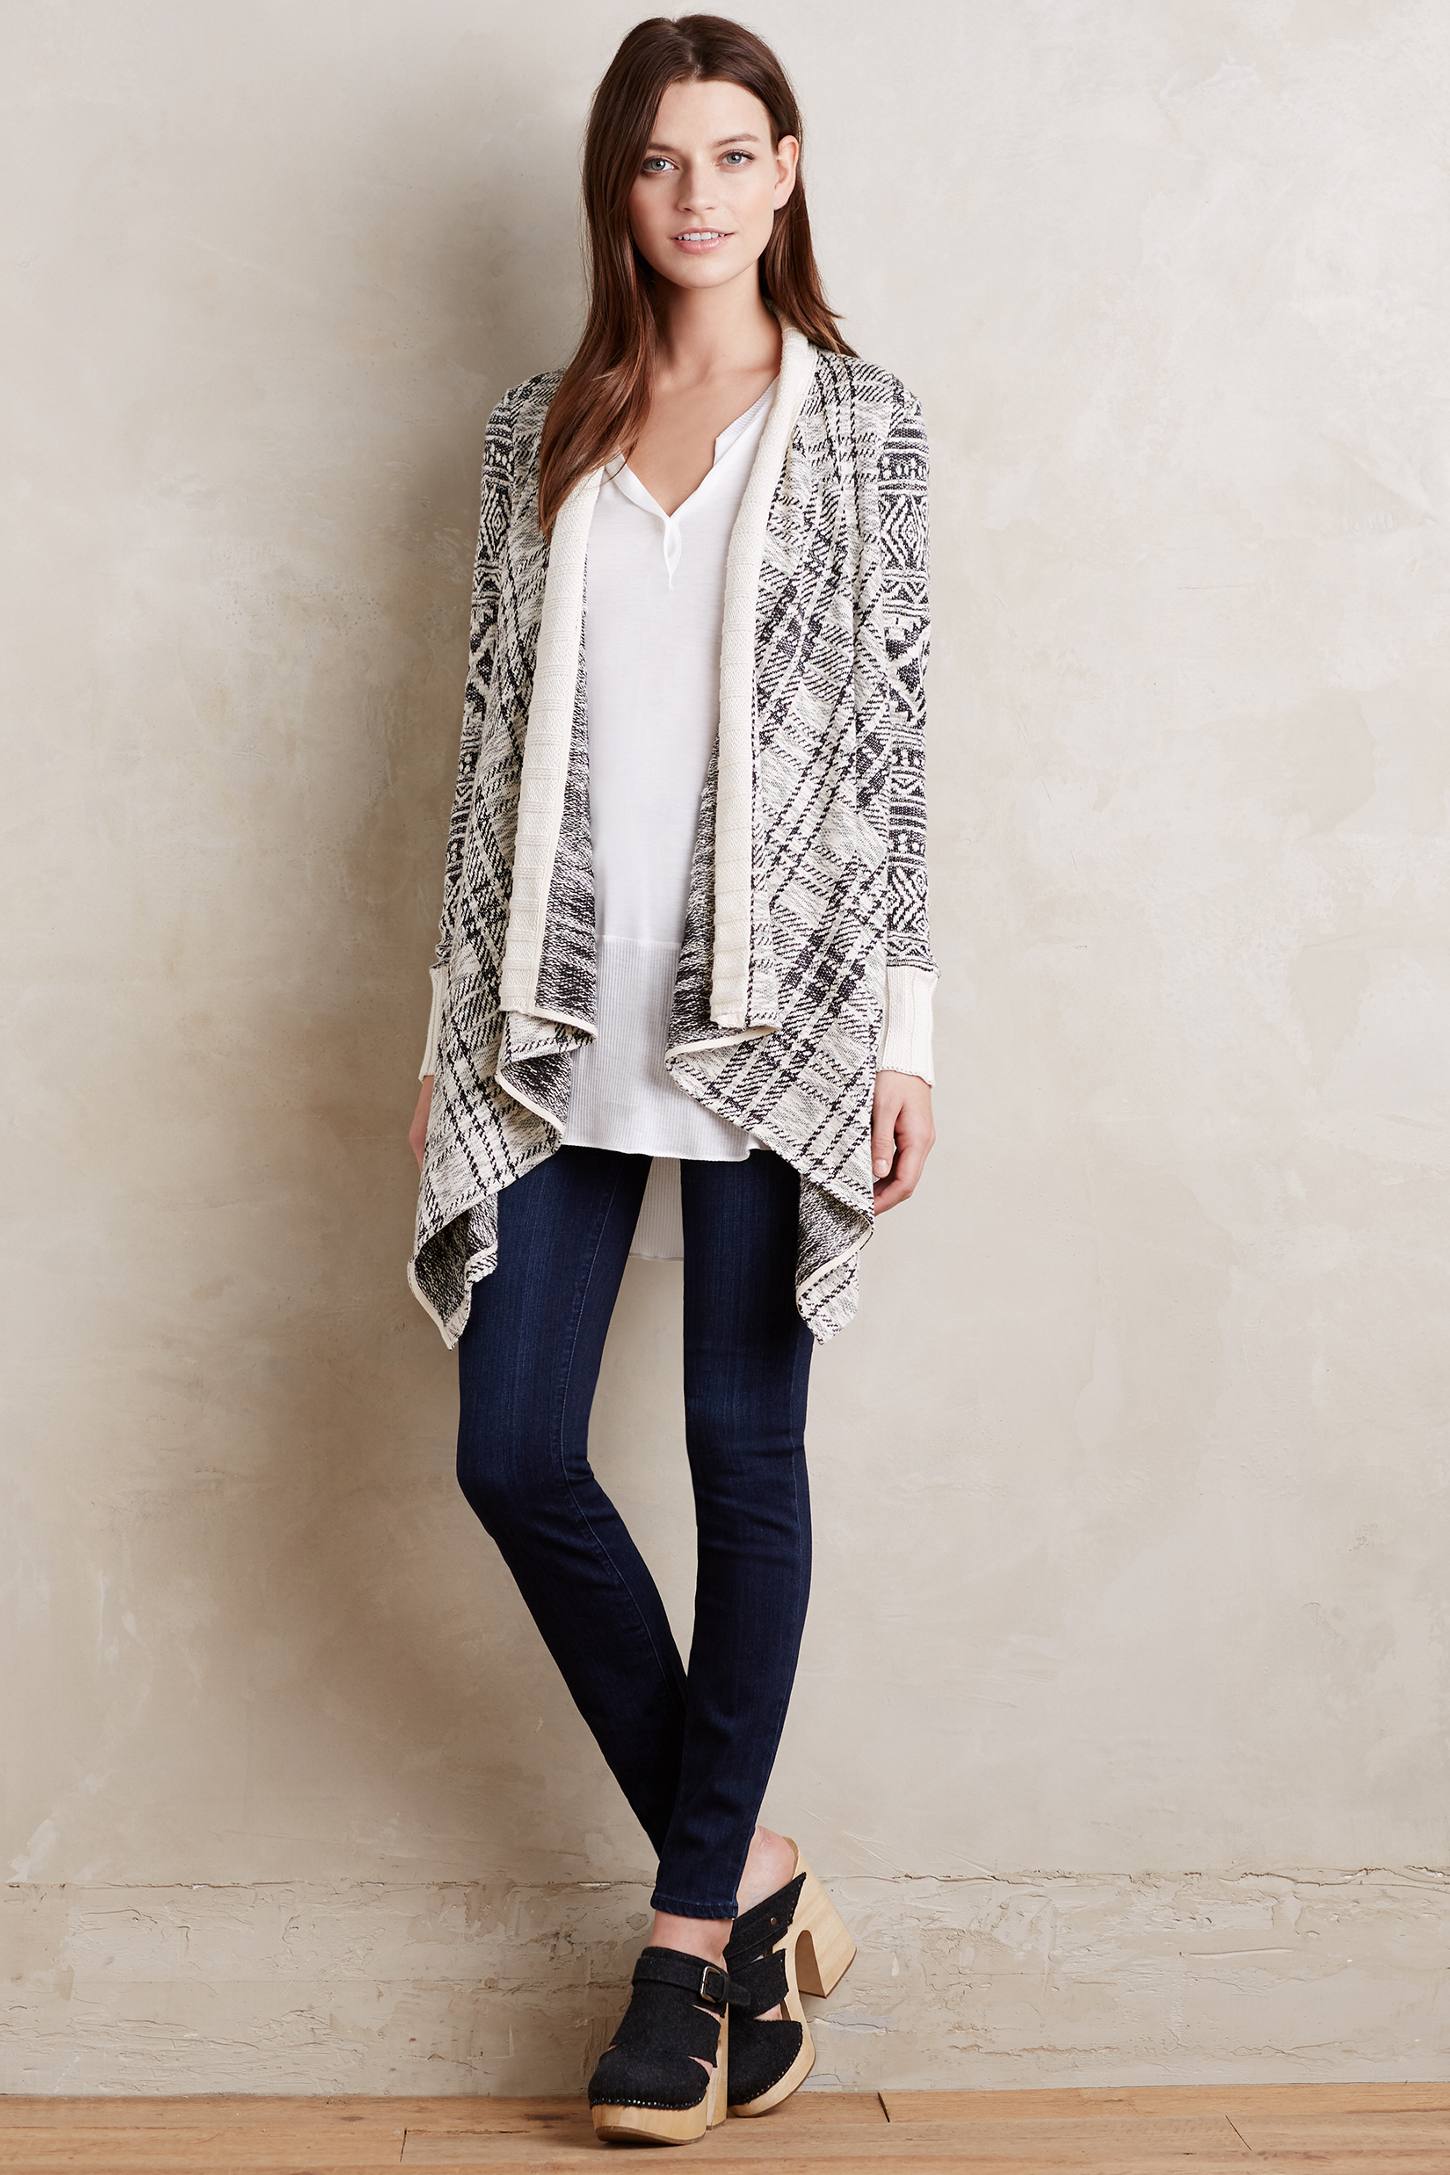 Jacquard Cardigan from Anthropologie